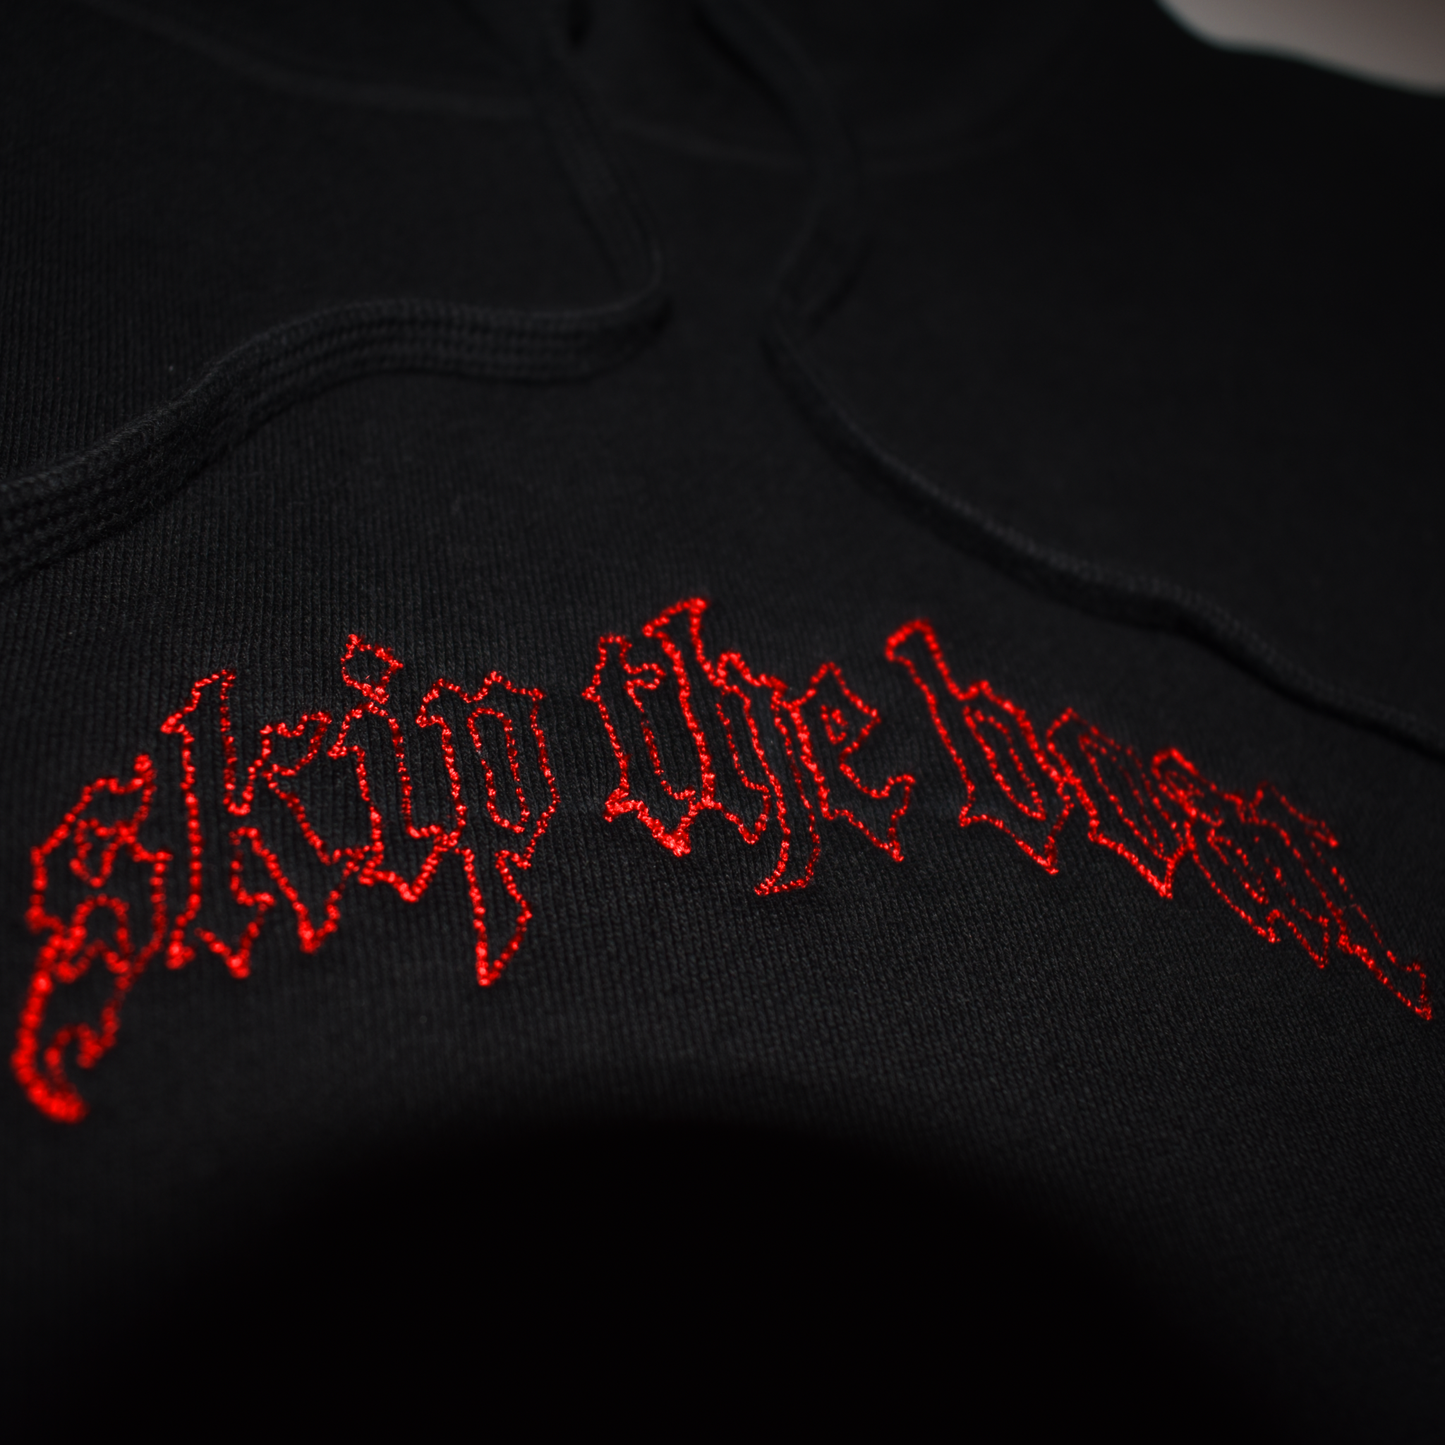 THE "IGNORANCE IS BLISS" HOODIE